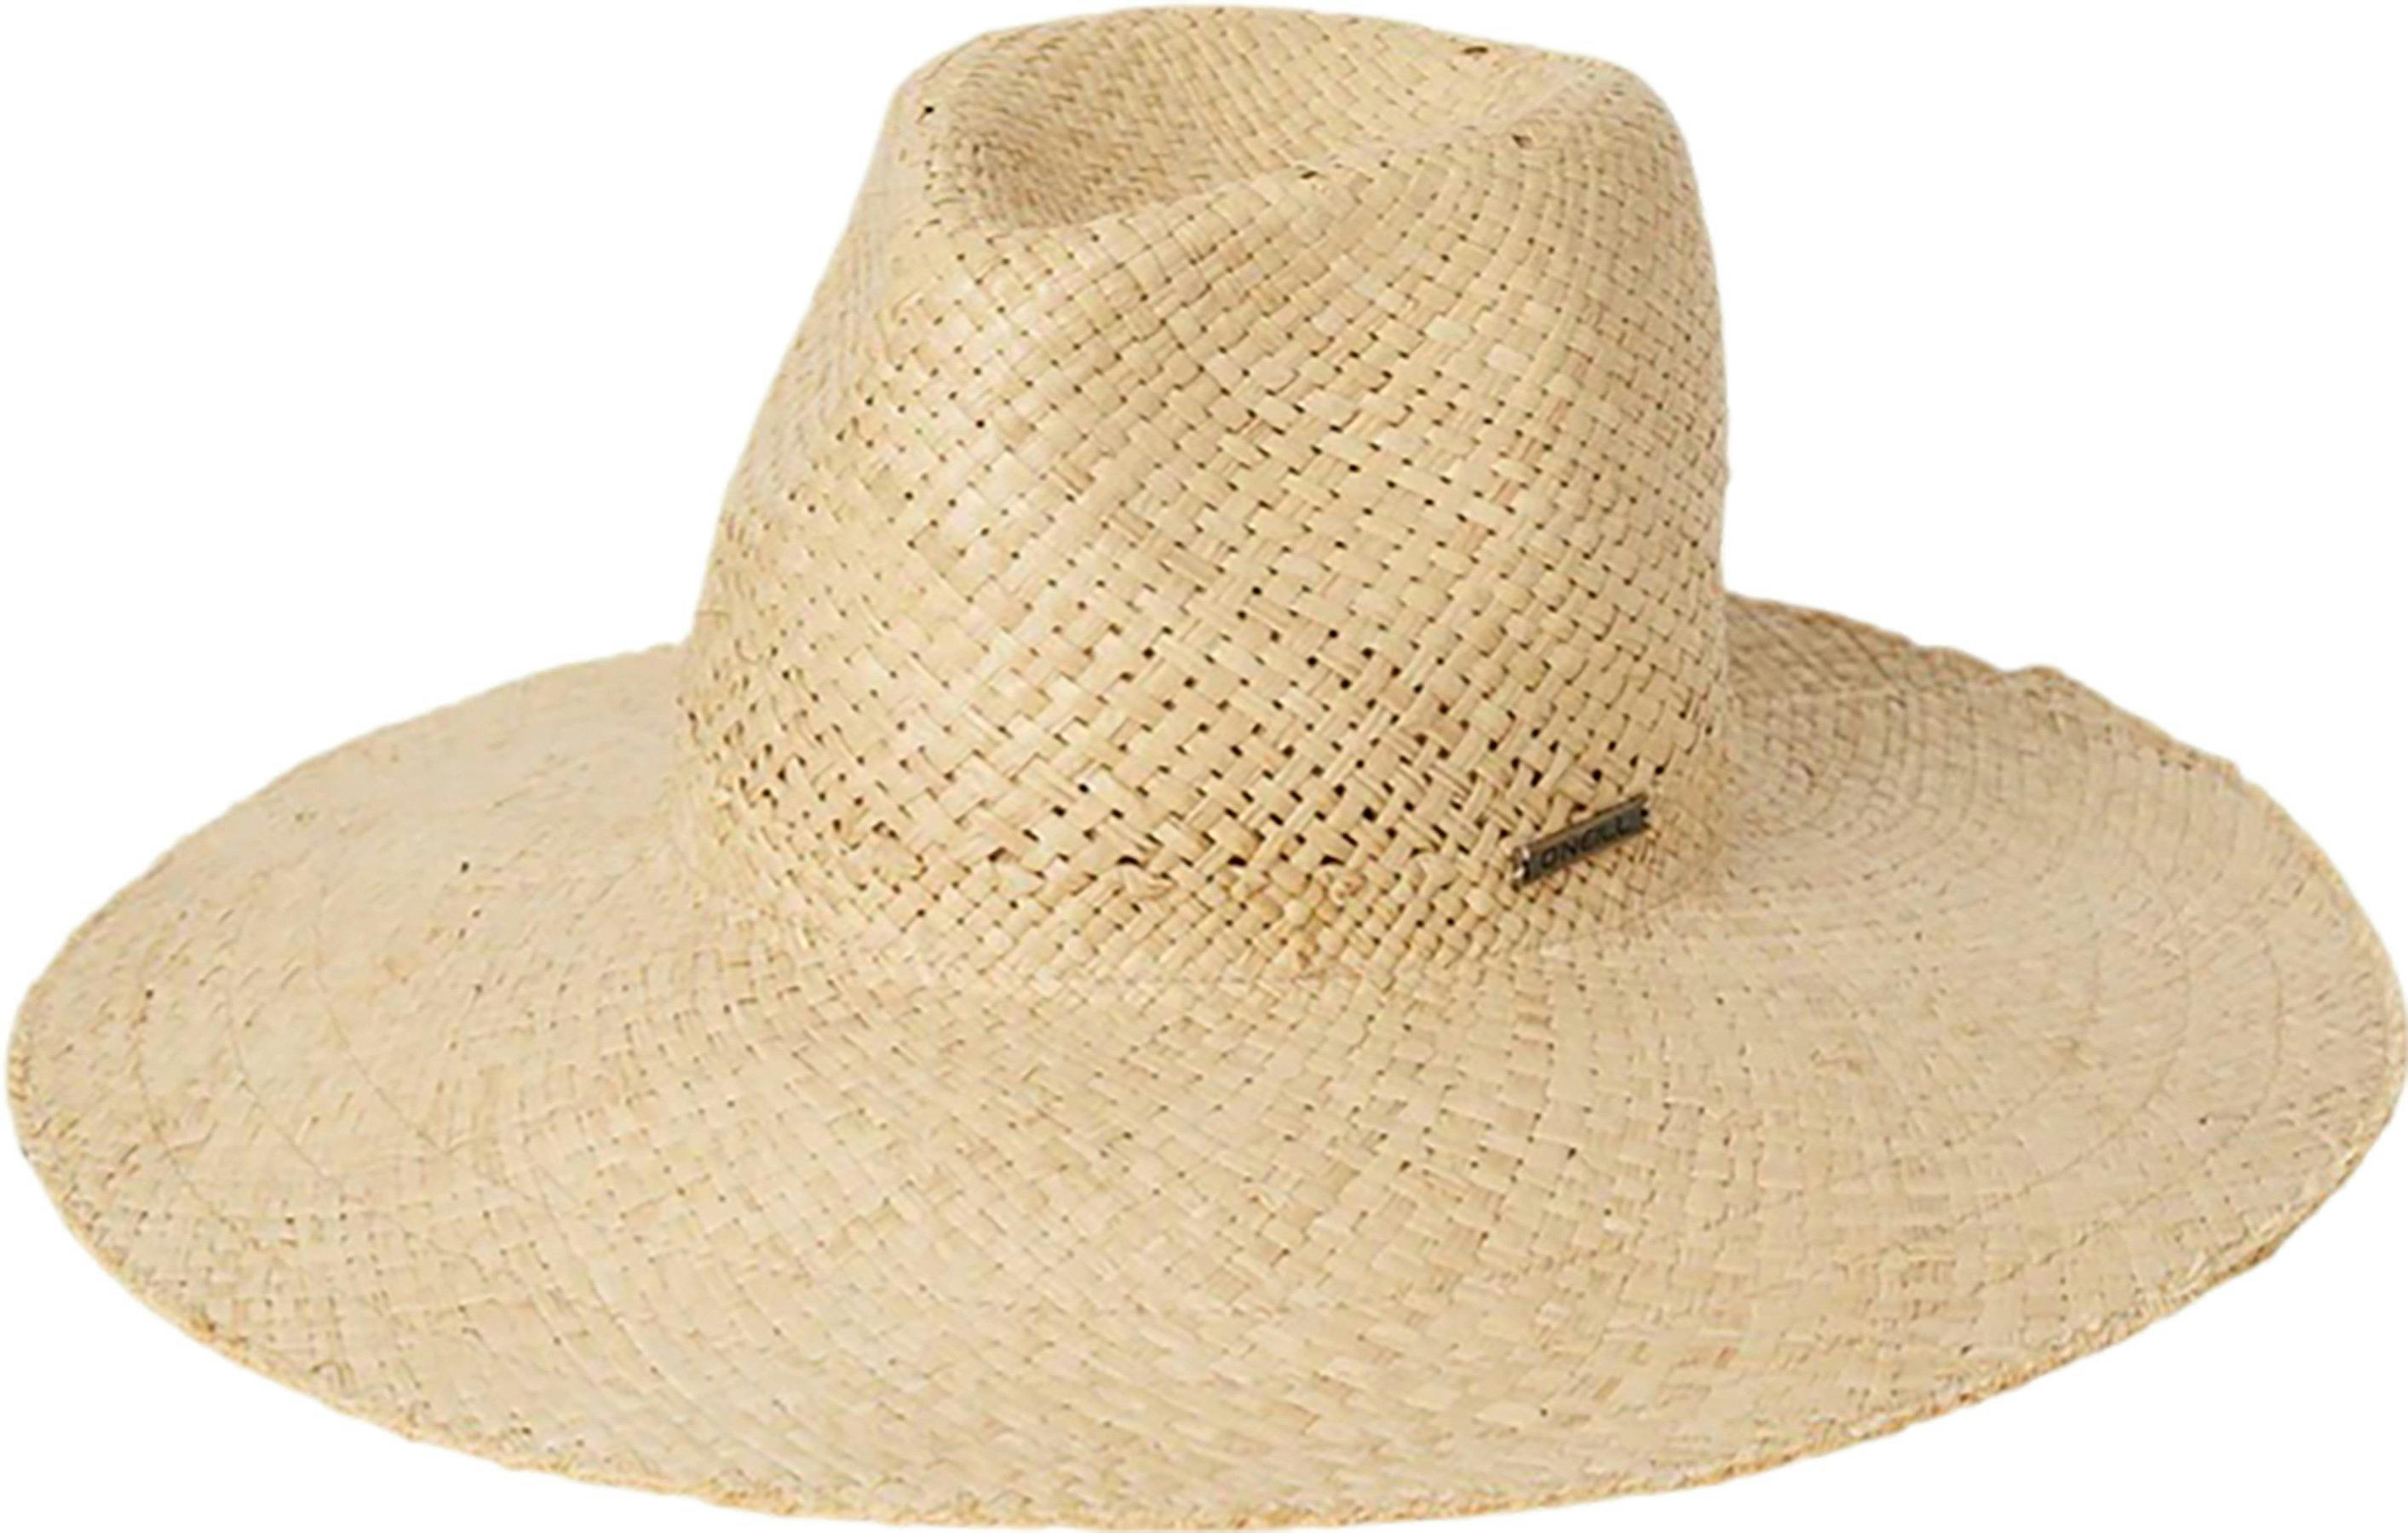 Product image for Hermosa Sun Hat - Women's